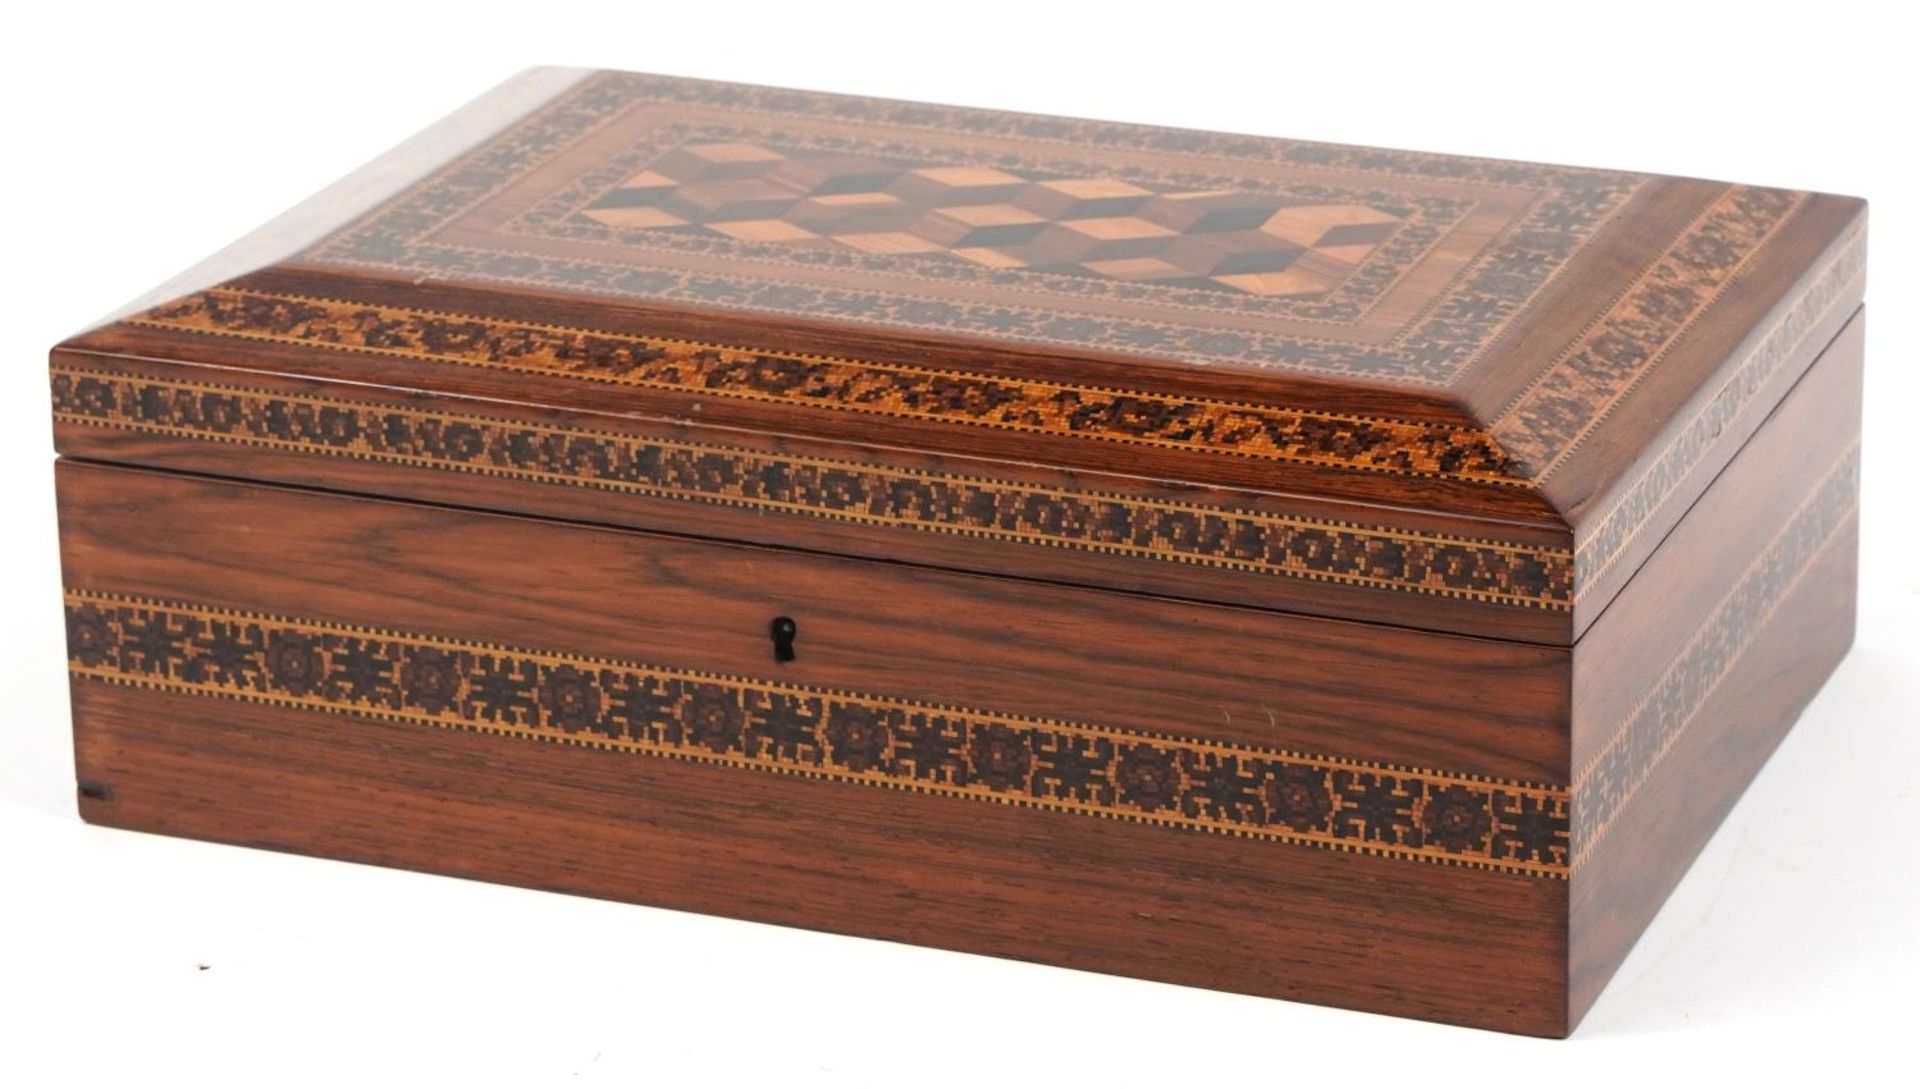 Victorian Tunbridge Ware casket with tumbling block design hinged lid and velvet lined interior,